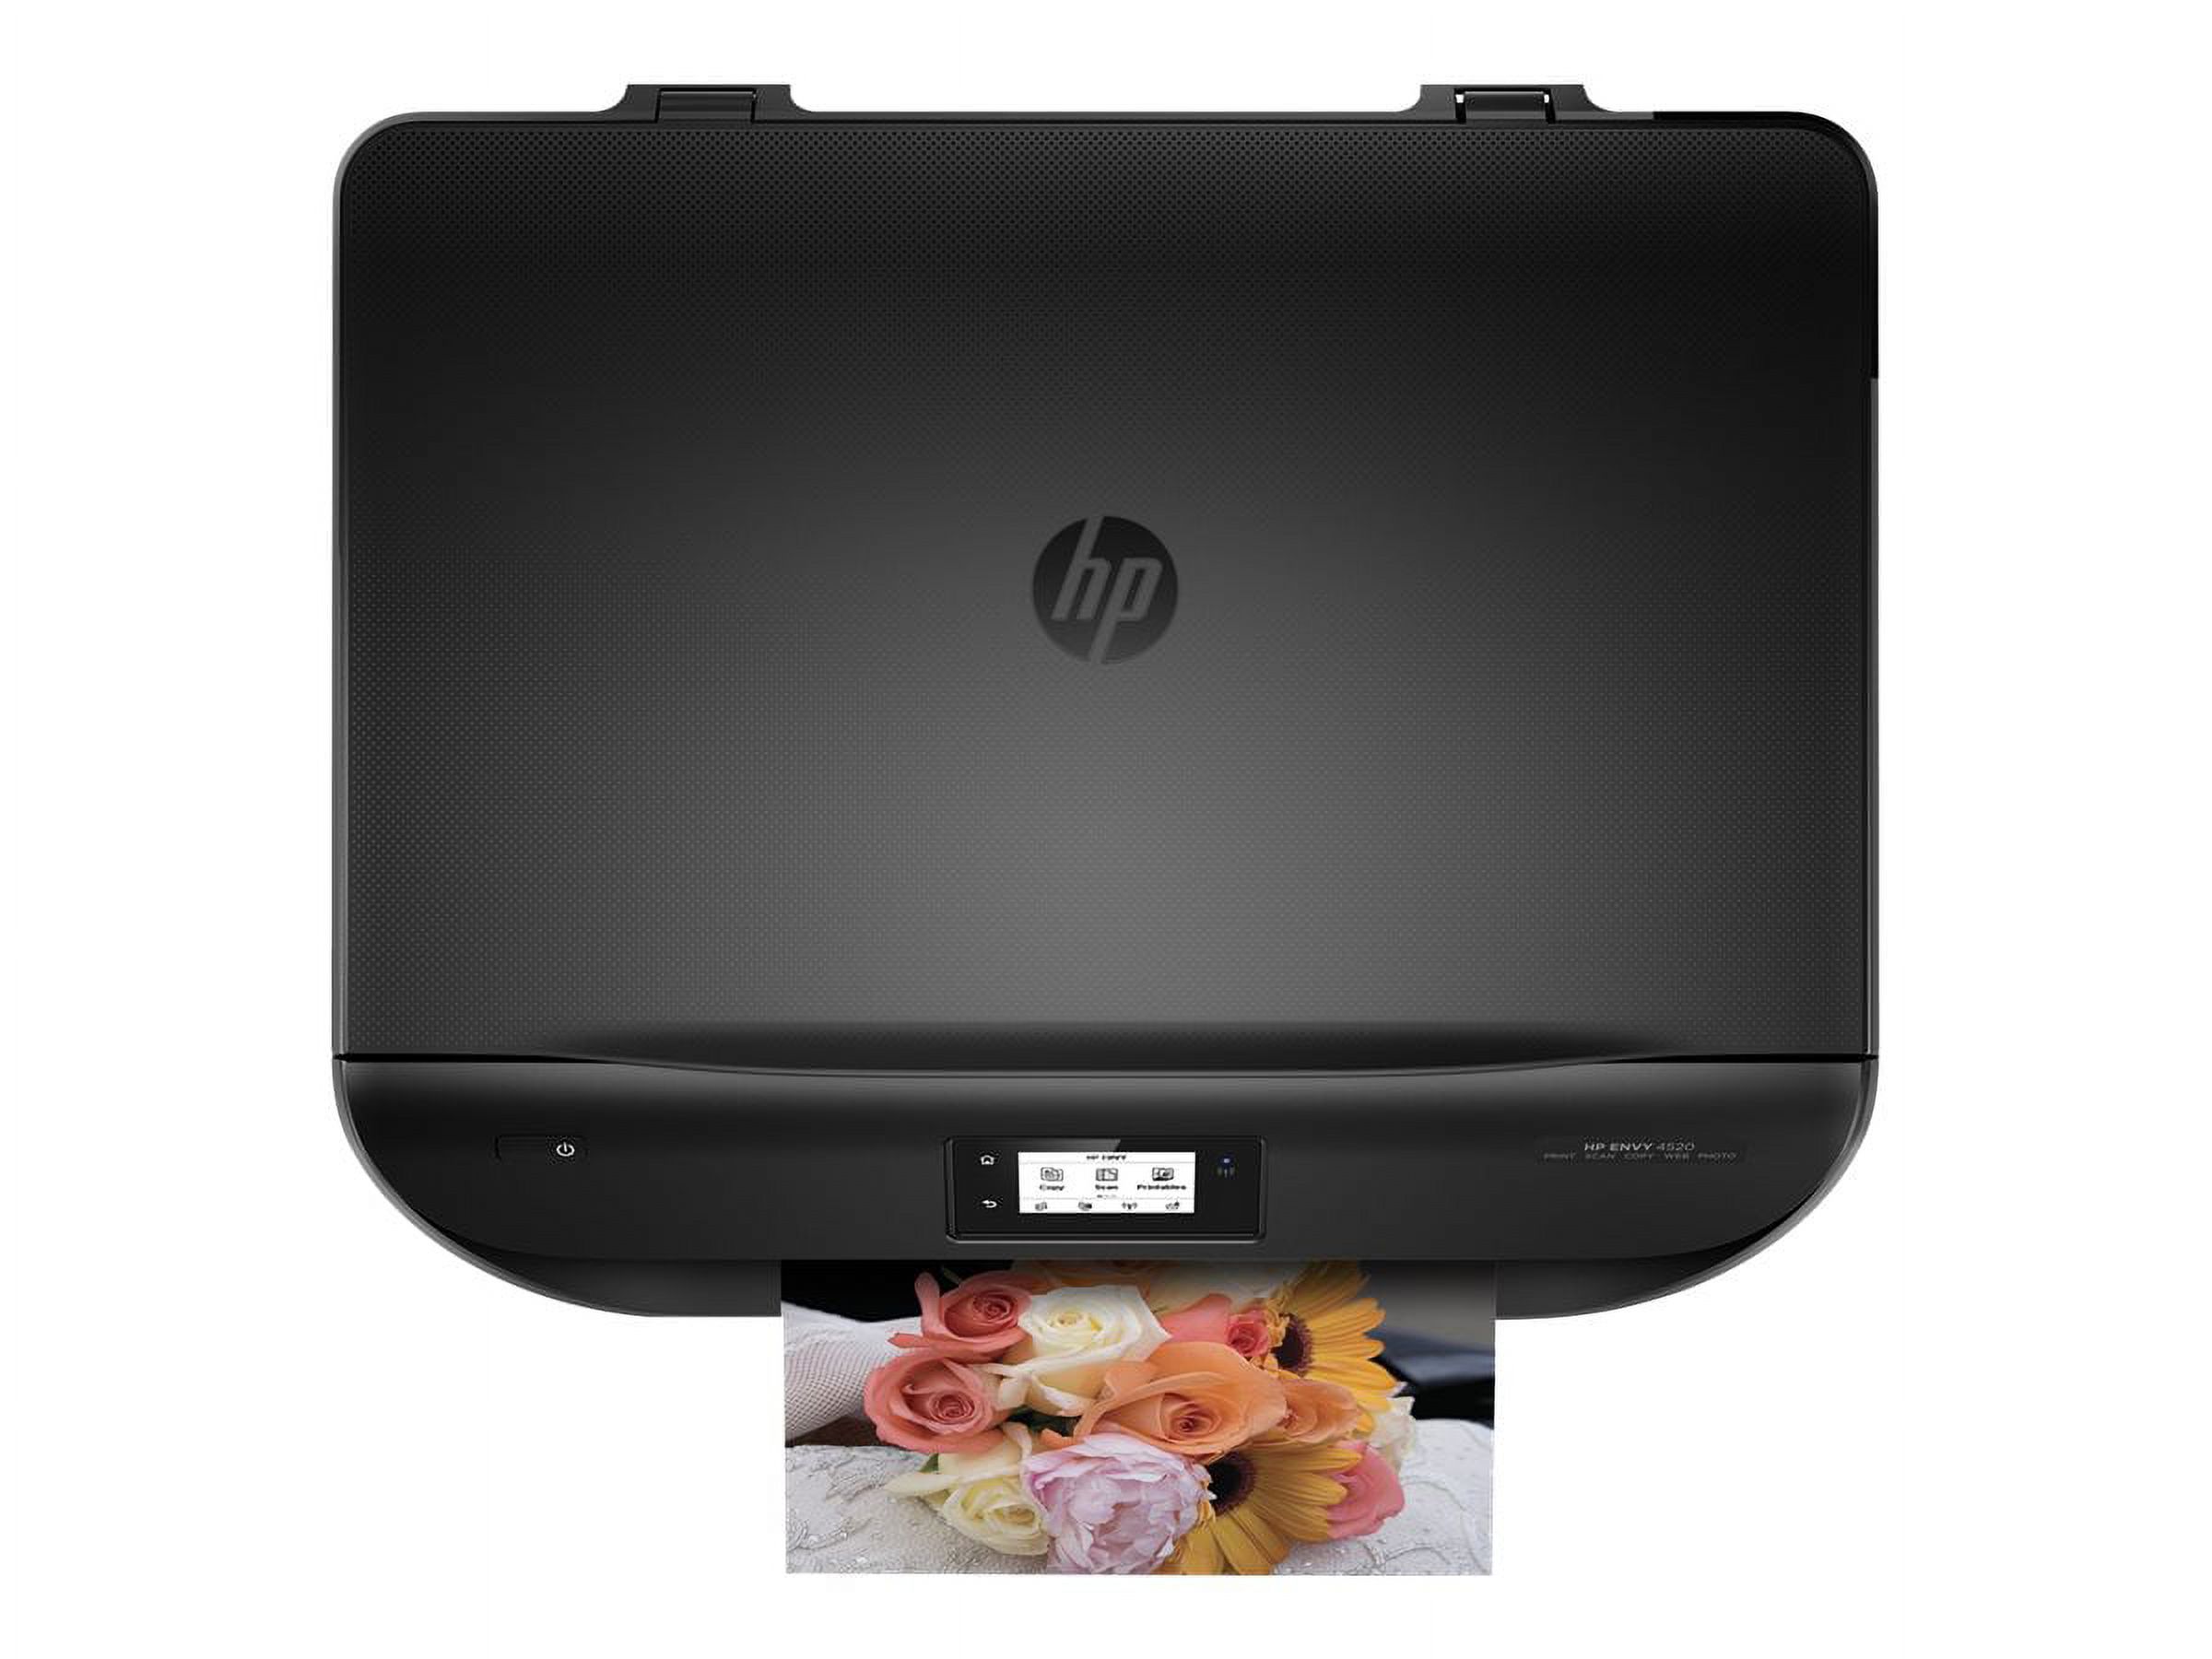 HP Envy 4520 All-in-One - multifunction printer (color) - image 4 of 33